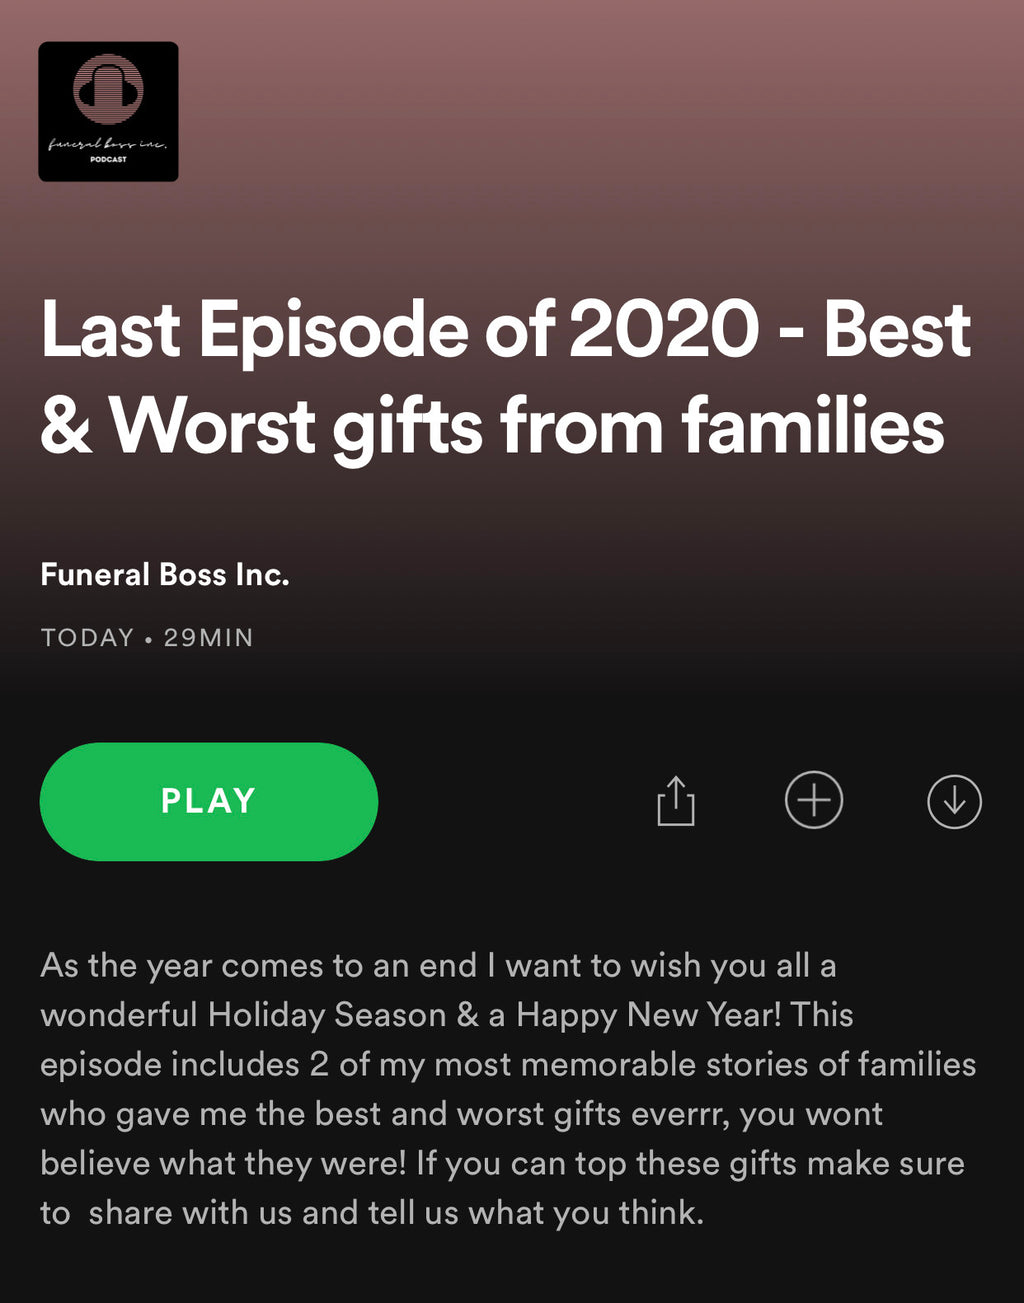 Last Podcast Episode of 2020